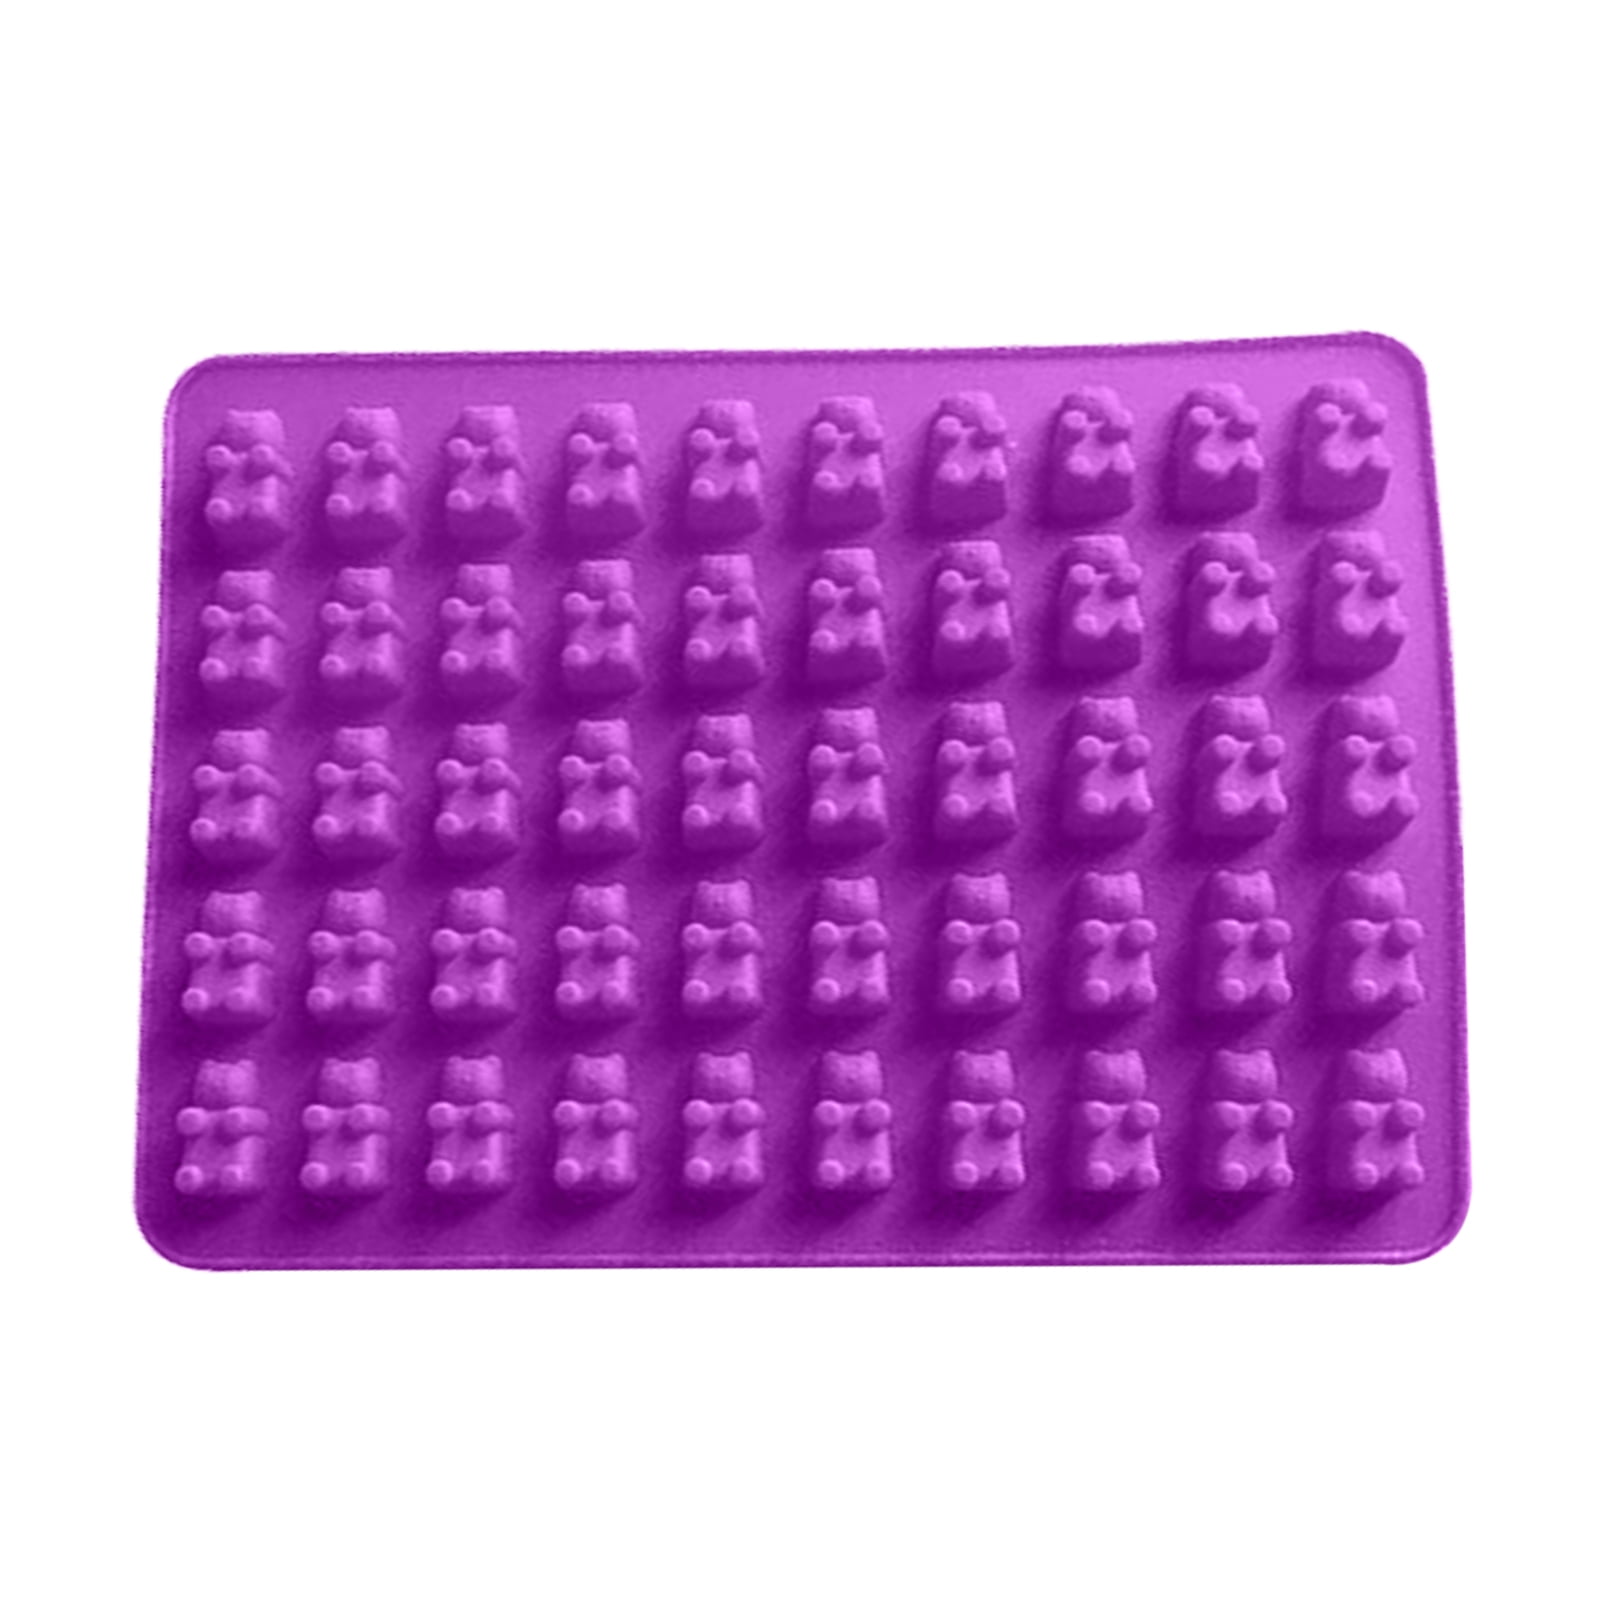 Mini 50Grids Ice Tray Frozen Silicone Ice Cube Tray kids Cute Bear Maker Mold US 